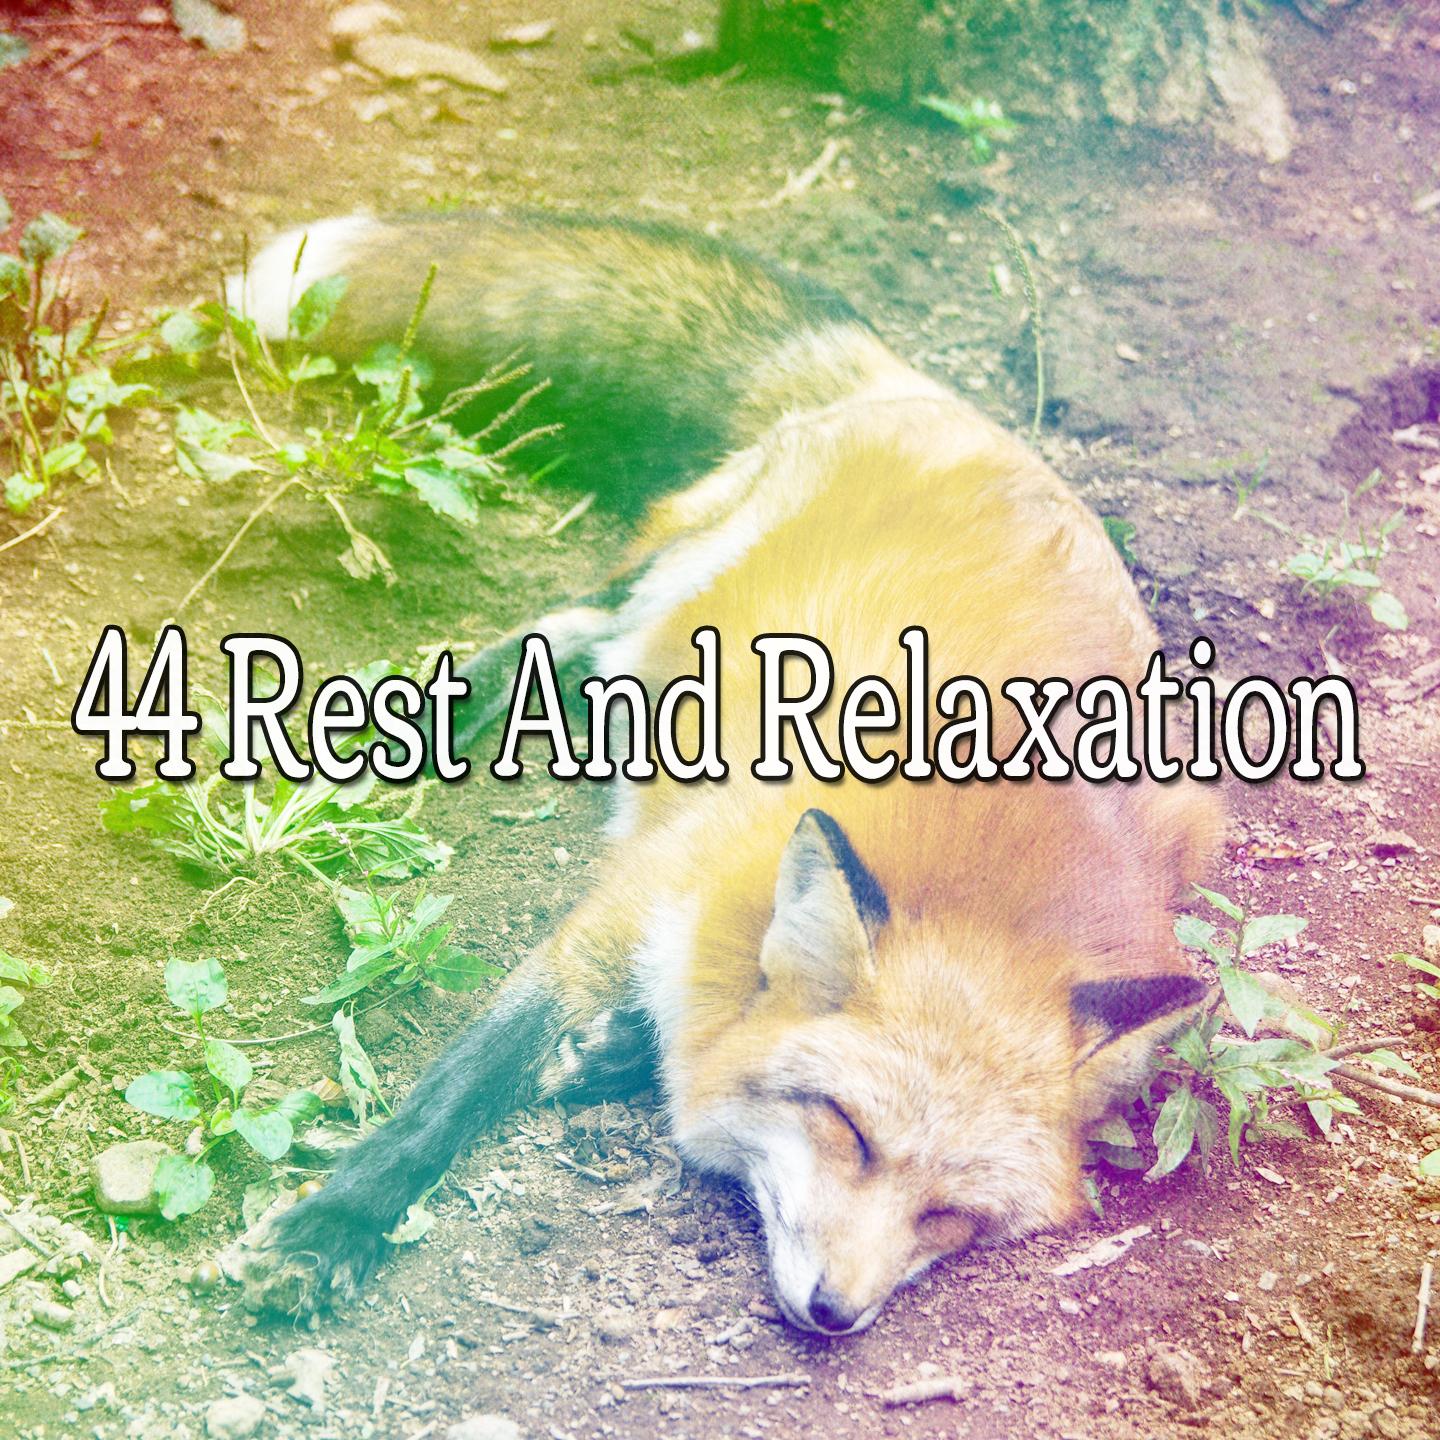 44 Rest And Relaxation